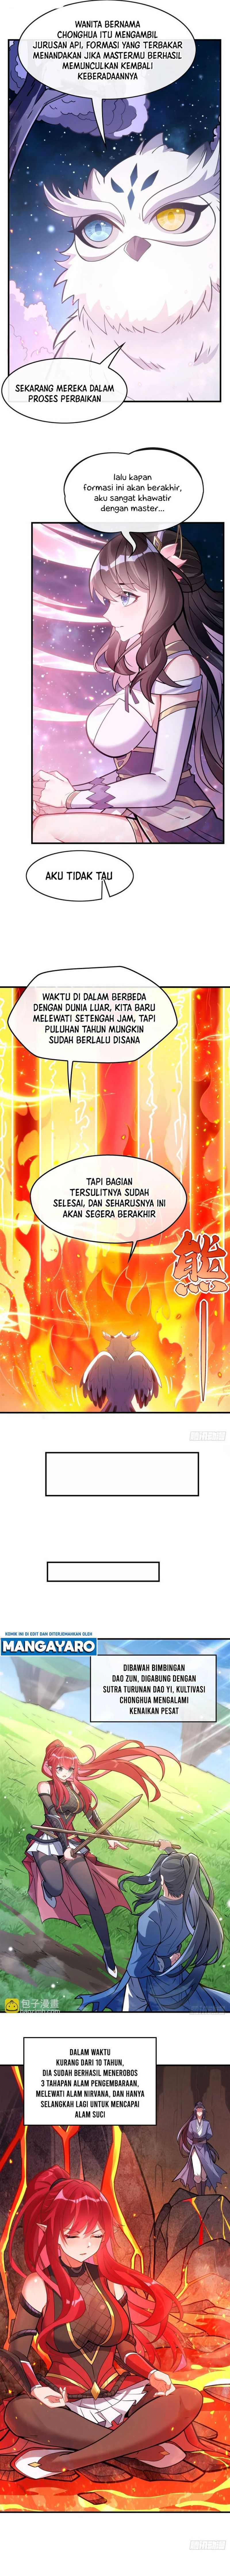 Dilarang COPAS - situs resmi www.mangacanblog.com - Komik my female apprentices are all big shots from the future 152 - chapter 152 153 Indonesia my female apprentices are all big shots from the future 152 - chapter 152 Terbaru 7|Baca Manga Komik Indonesia|Mangacan